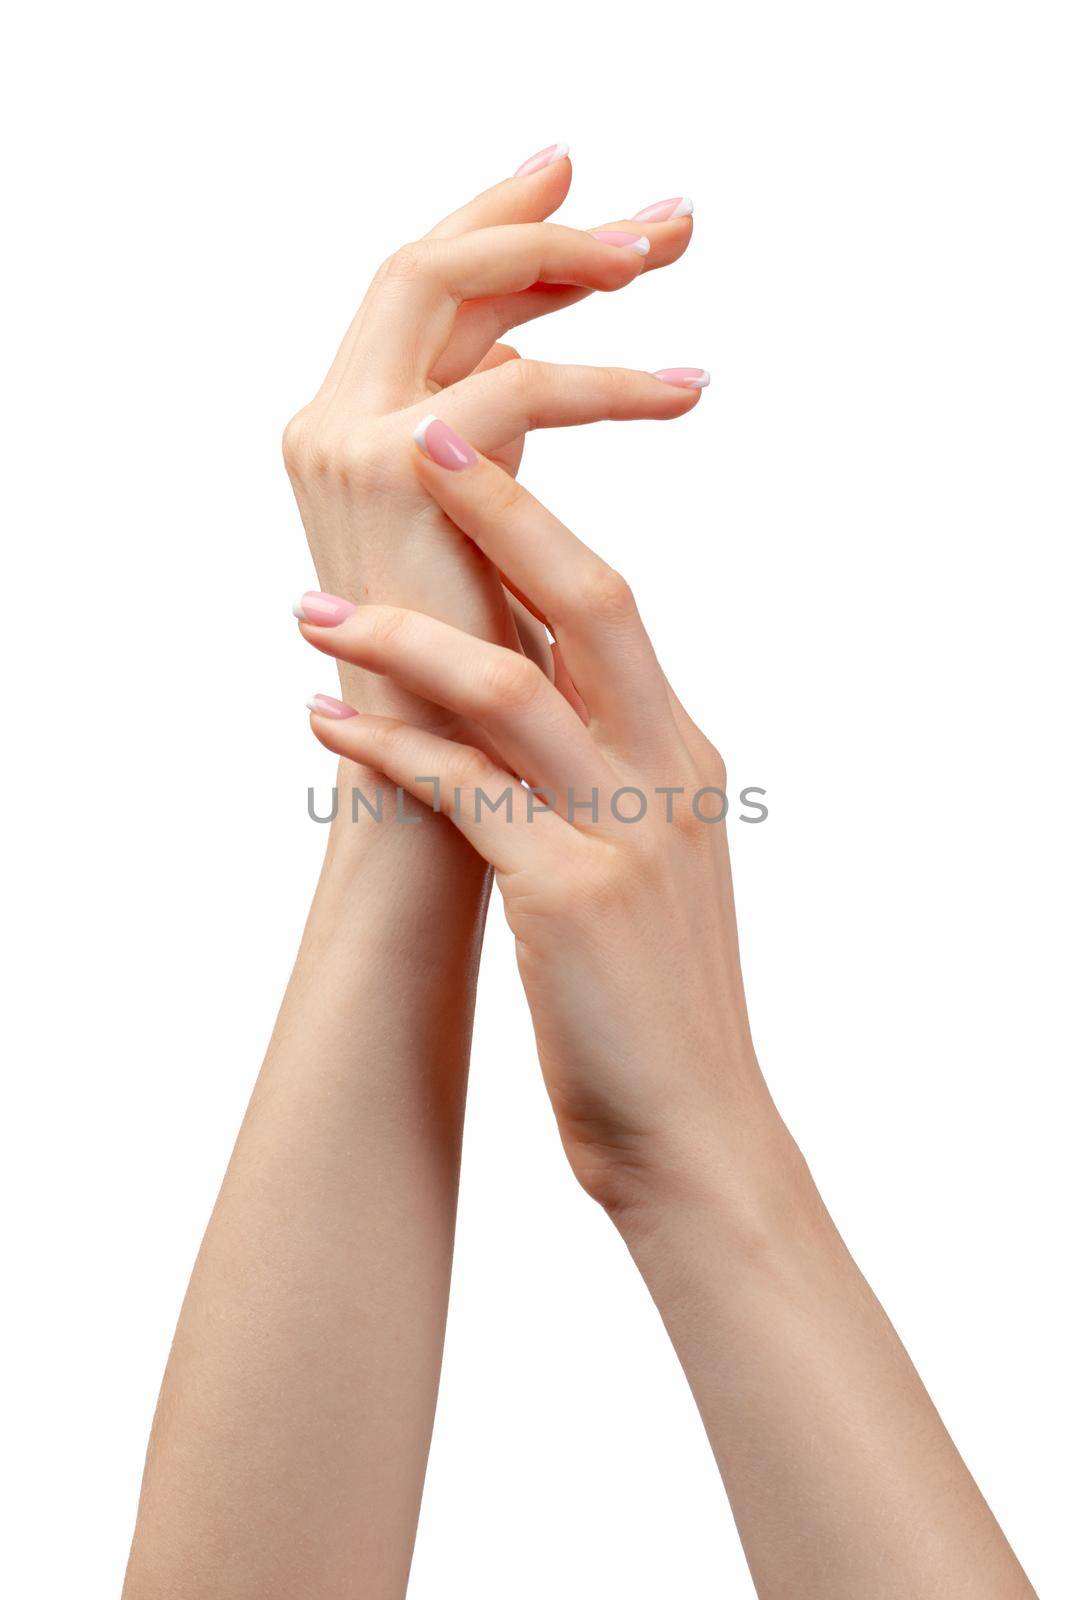 Well-groomed female hands with manicure on white background by Fabrikasimf